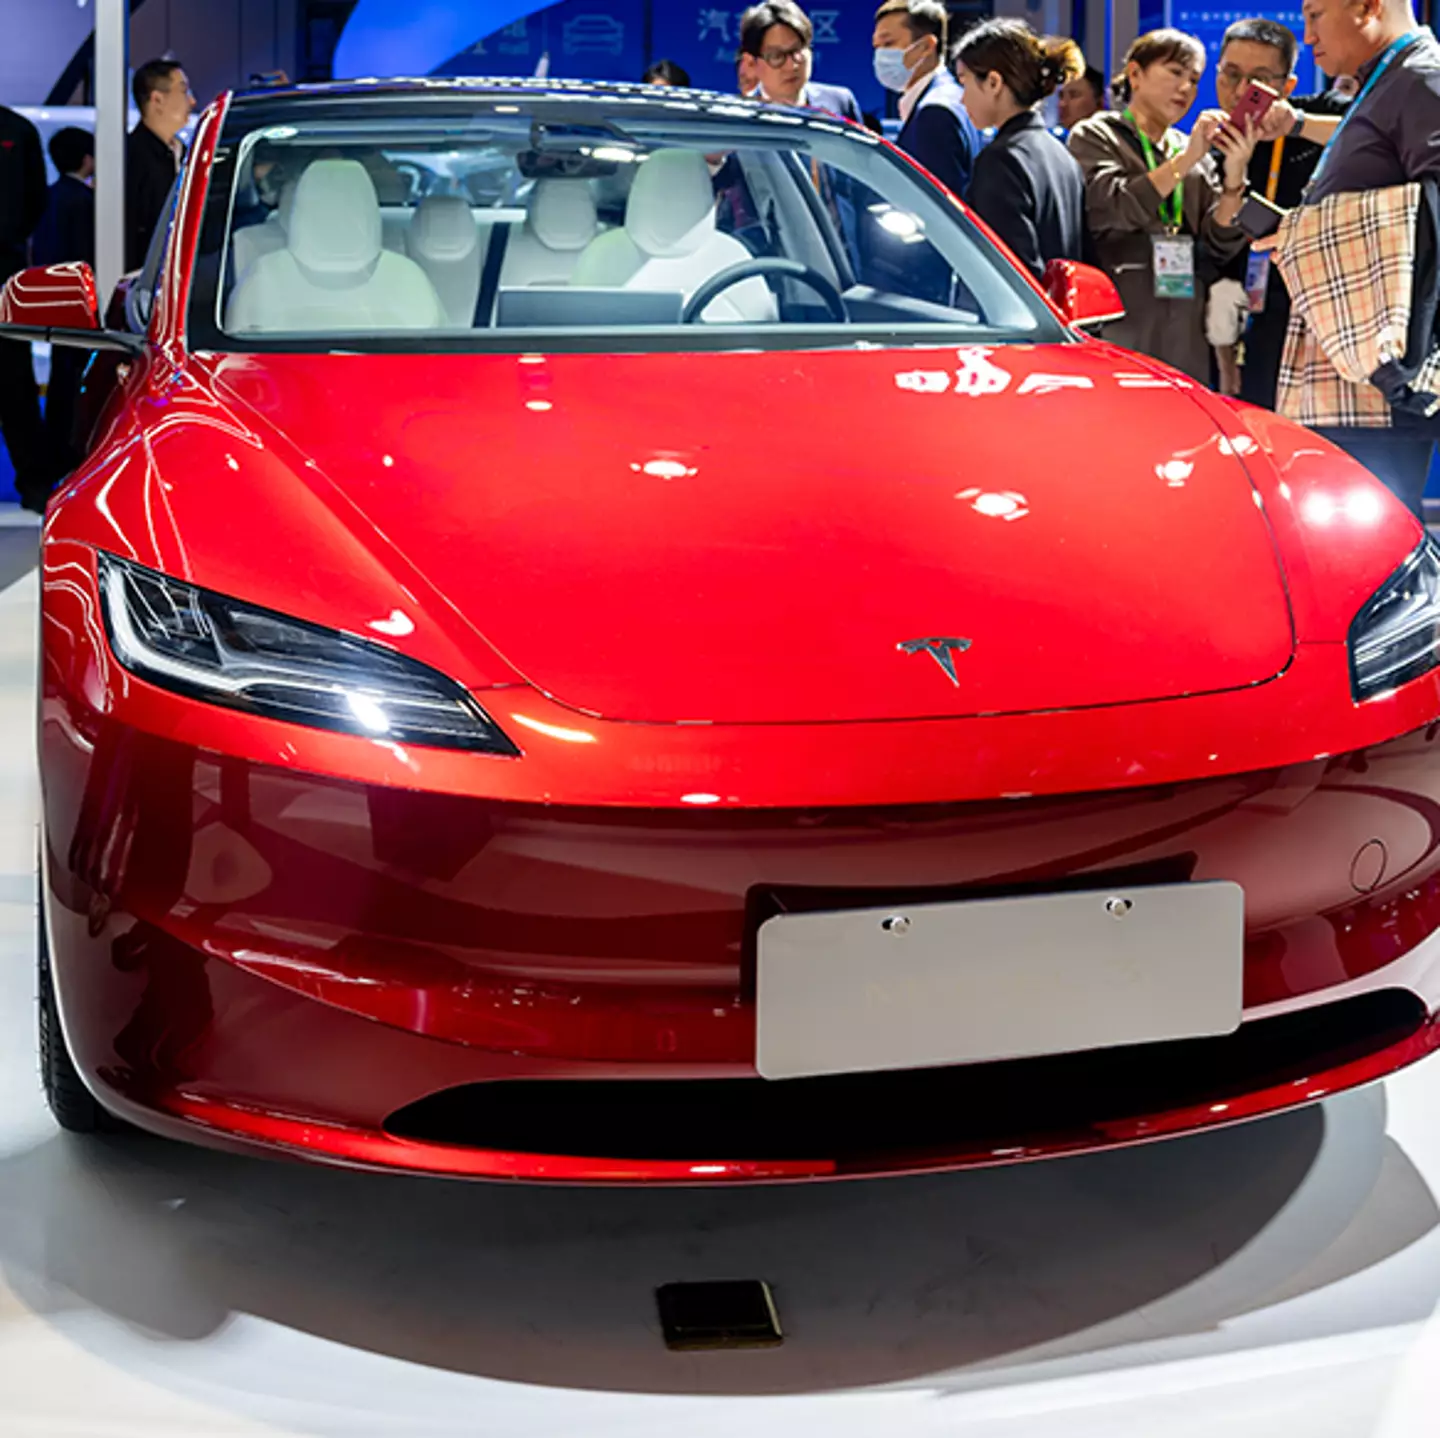 People have concerns after Tesla reveals monthly cost to lease Model 3 car